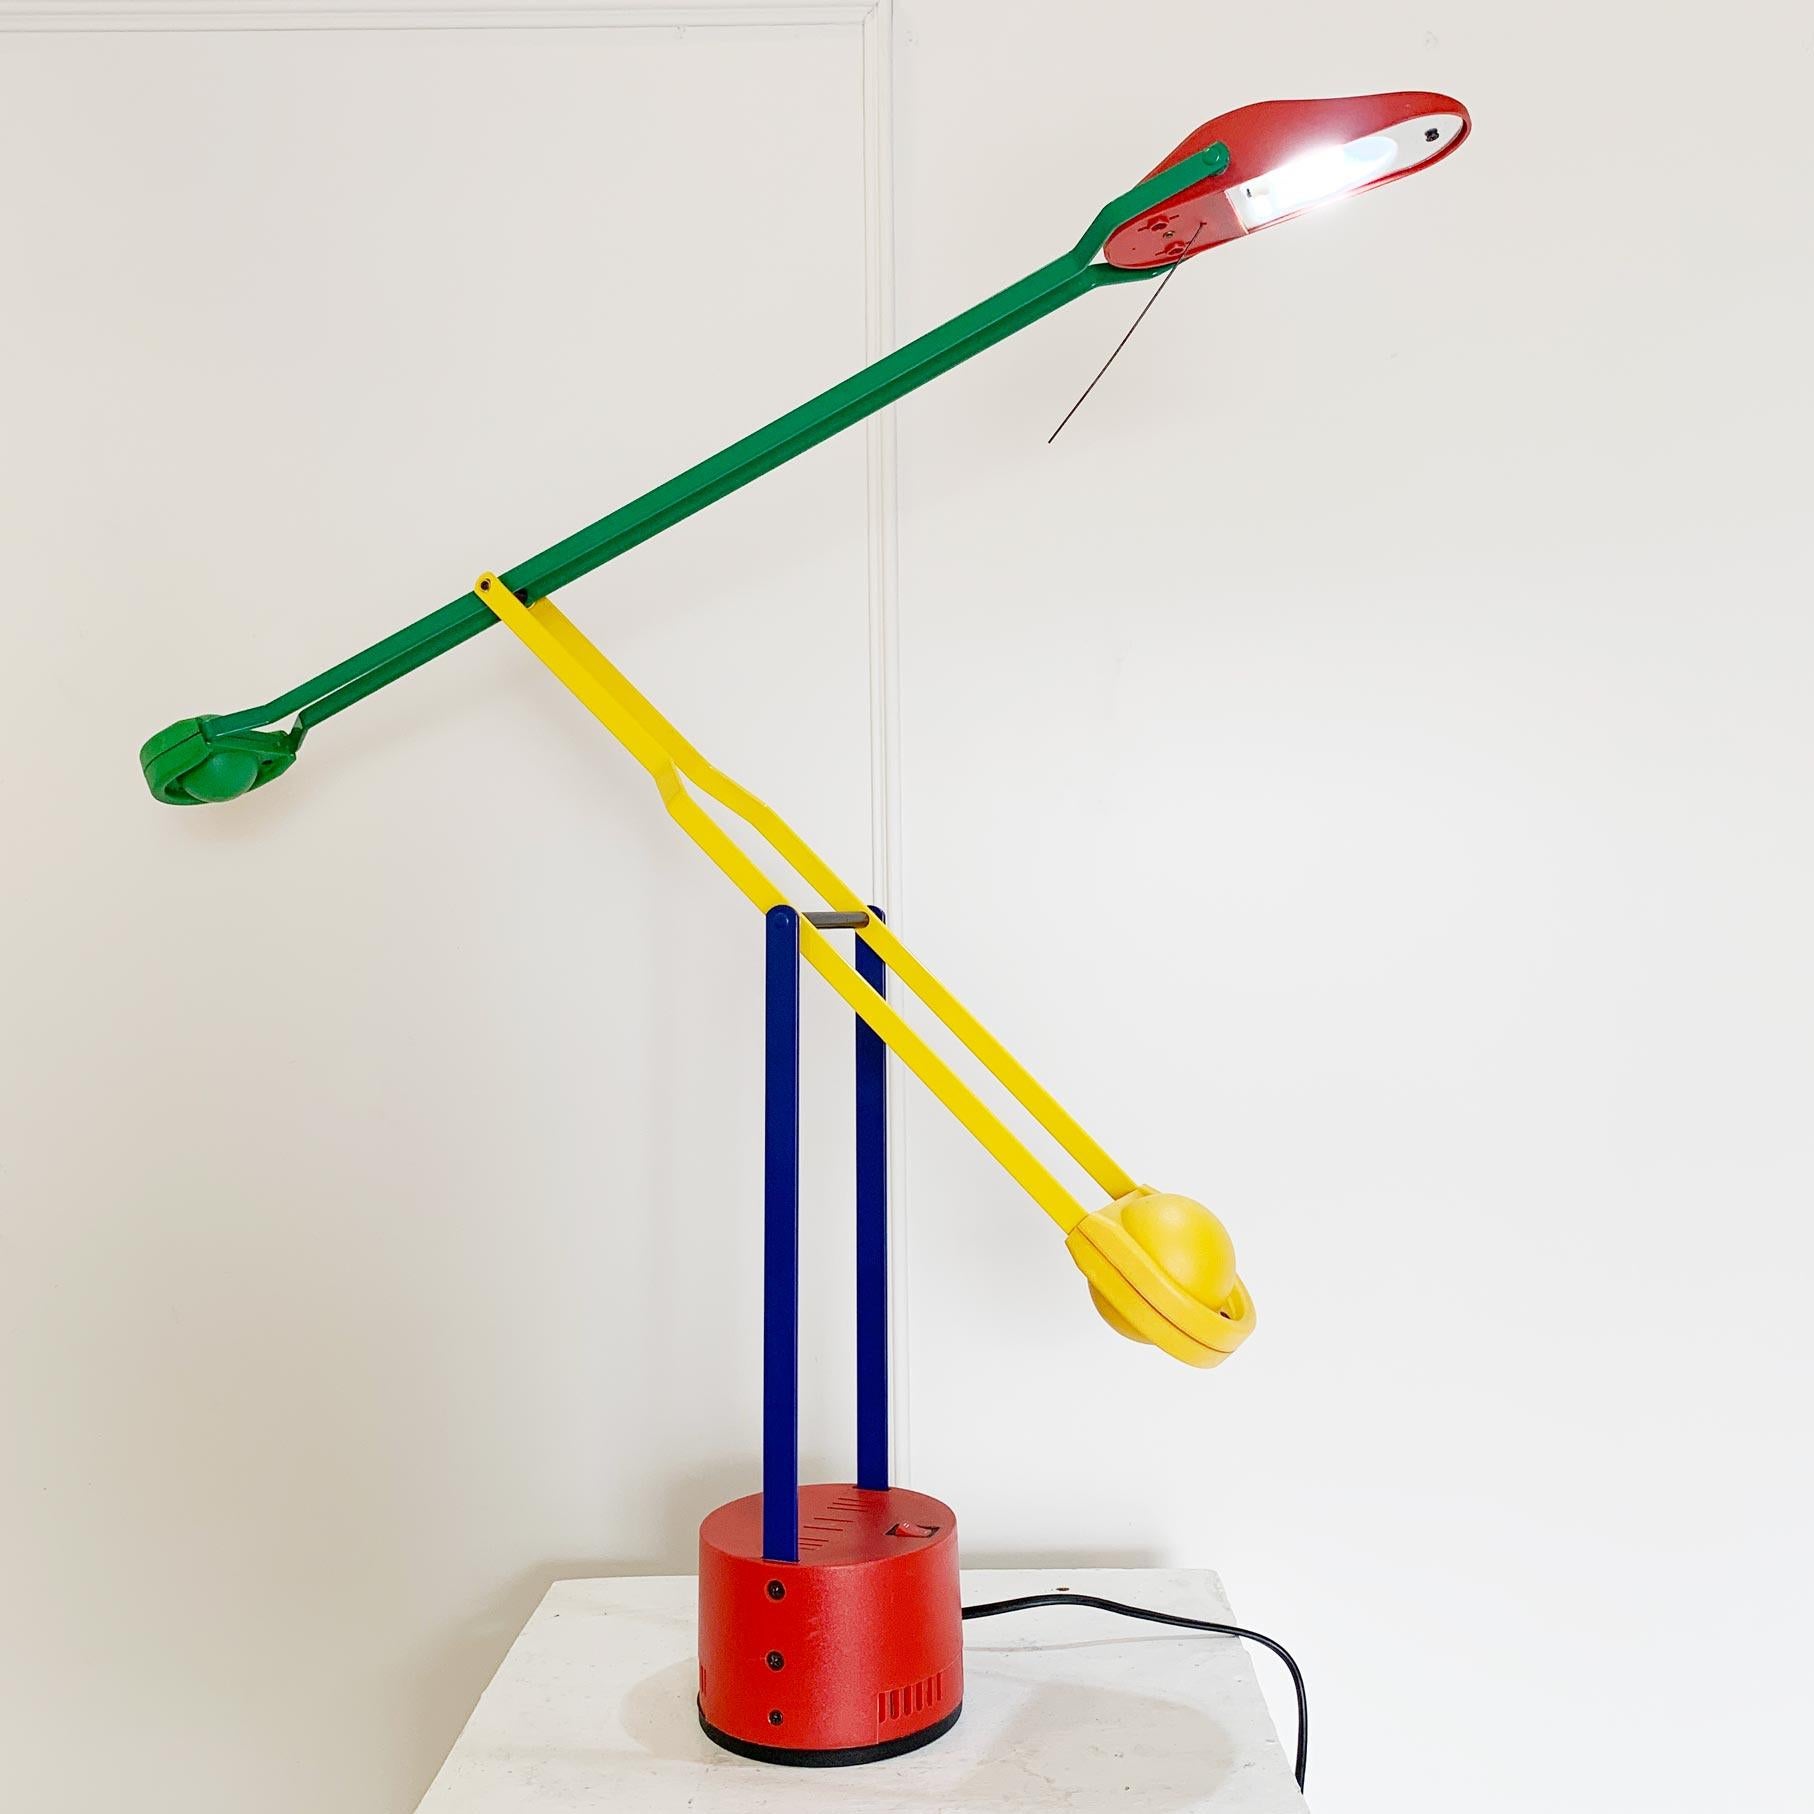 Rare Memphis style halogen desk lamp
By Italian brand Stilplast, 1980s
An explosion of primary colors mixed to create a bold and impressive statement lamp
Weighted ends to balance the light angle in different positions
Plastic and